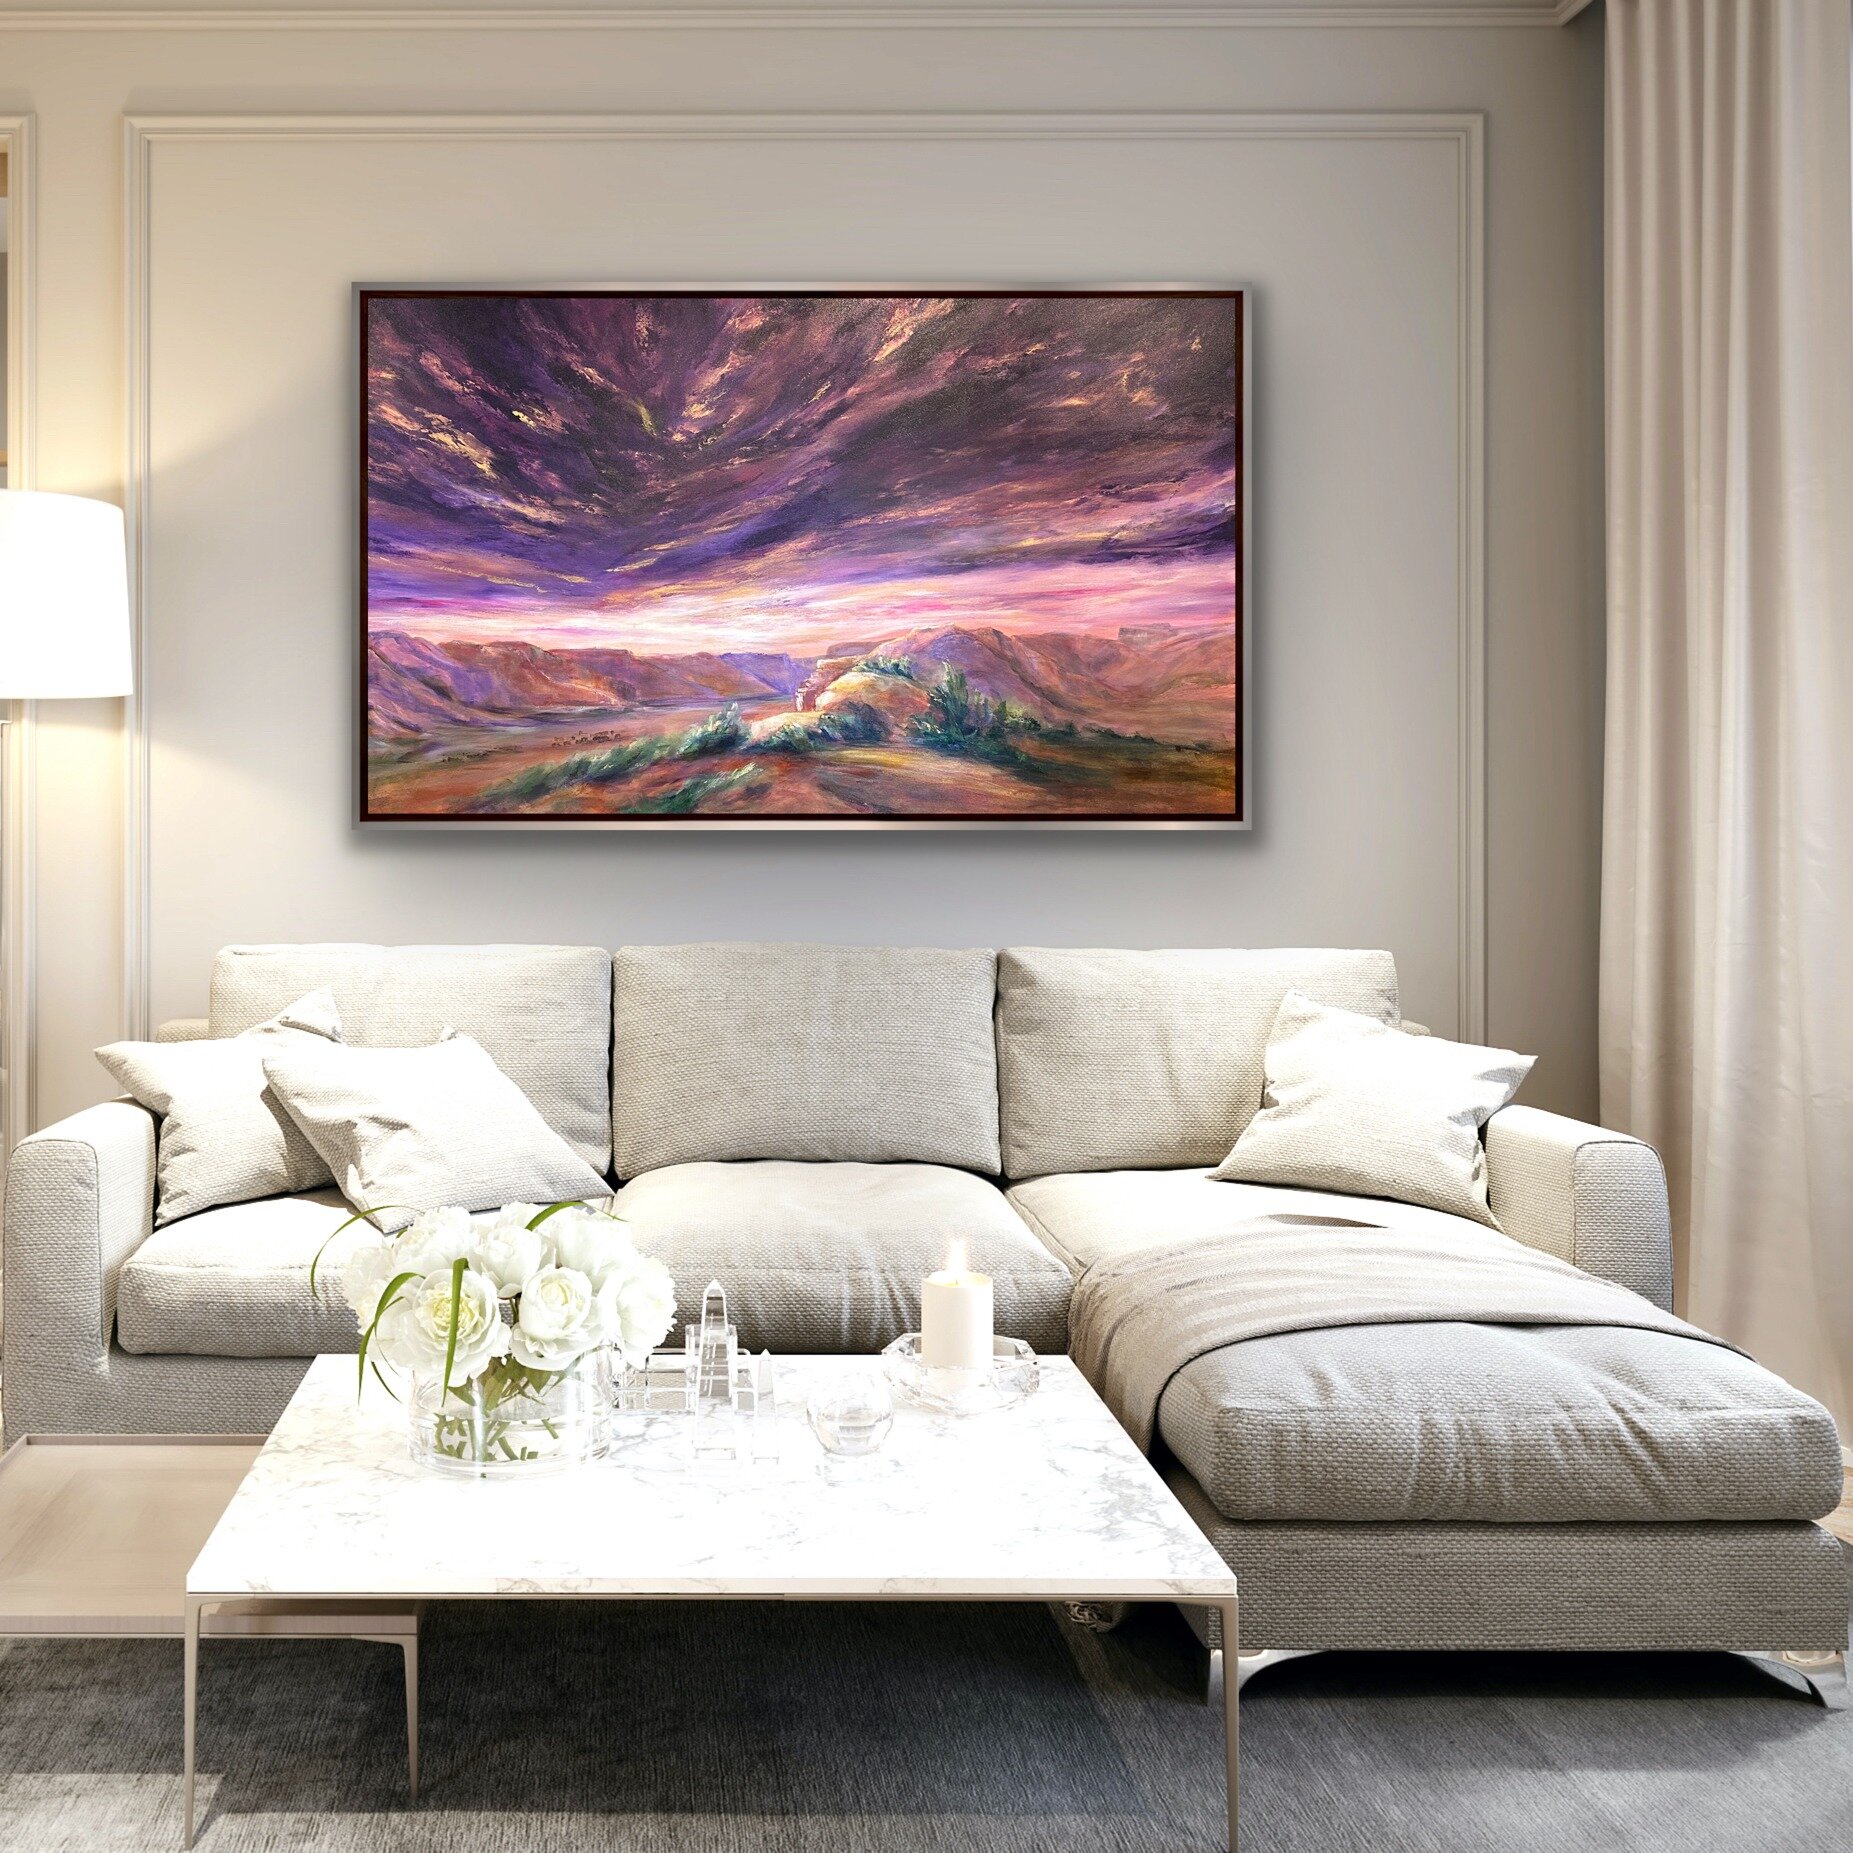 Have you ever considered custom artwork.  Commissioned artwork can add a beautiful touch to your personal space.  Send me a DM if you're interested. 

#pamferwornart #customartwork #bigskies #commissionedartwork #artforwalls #originalartwork #origina